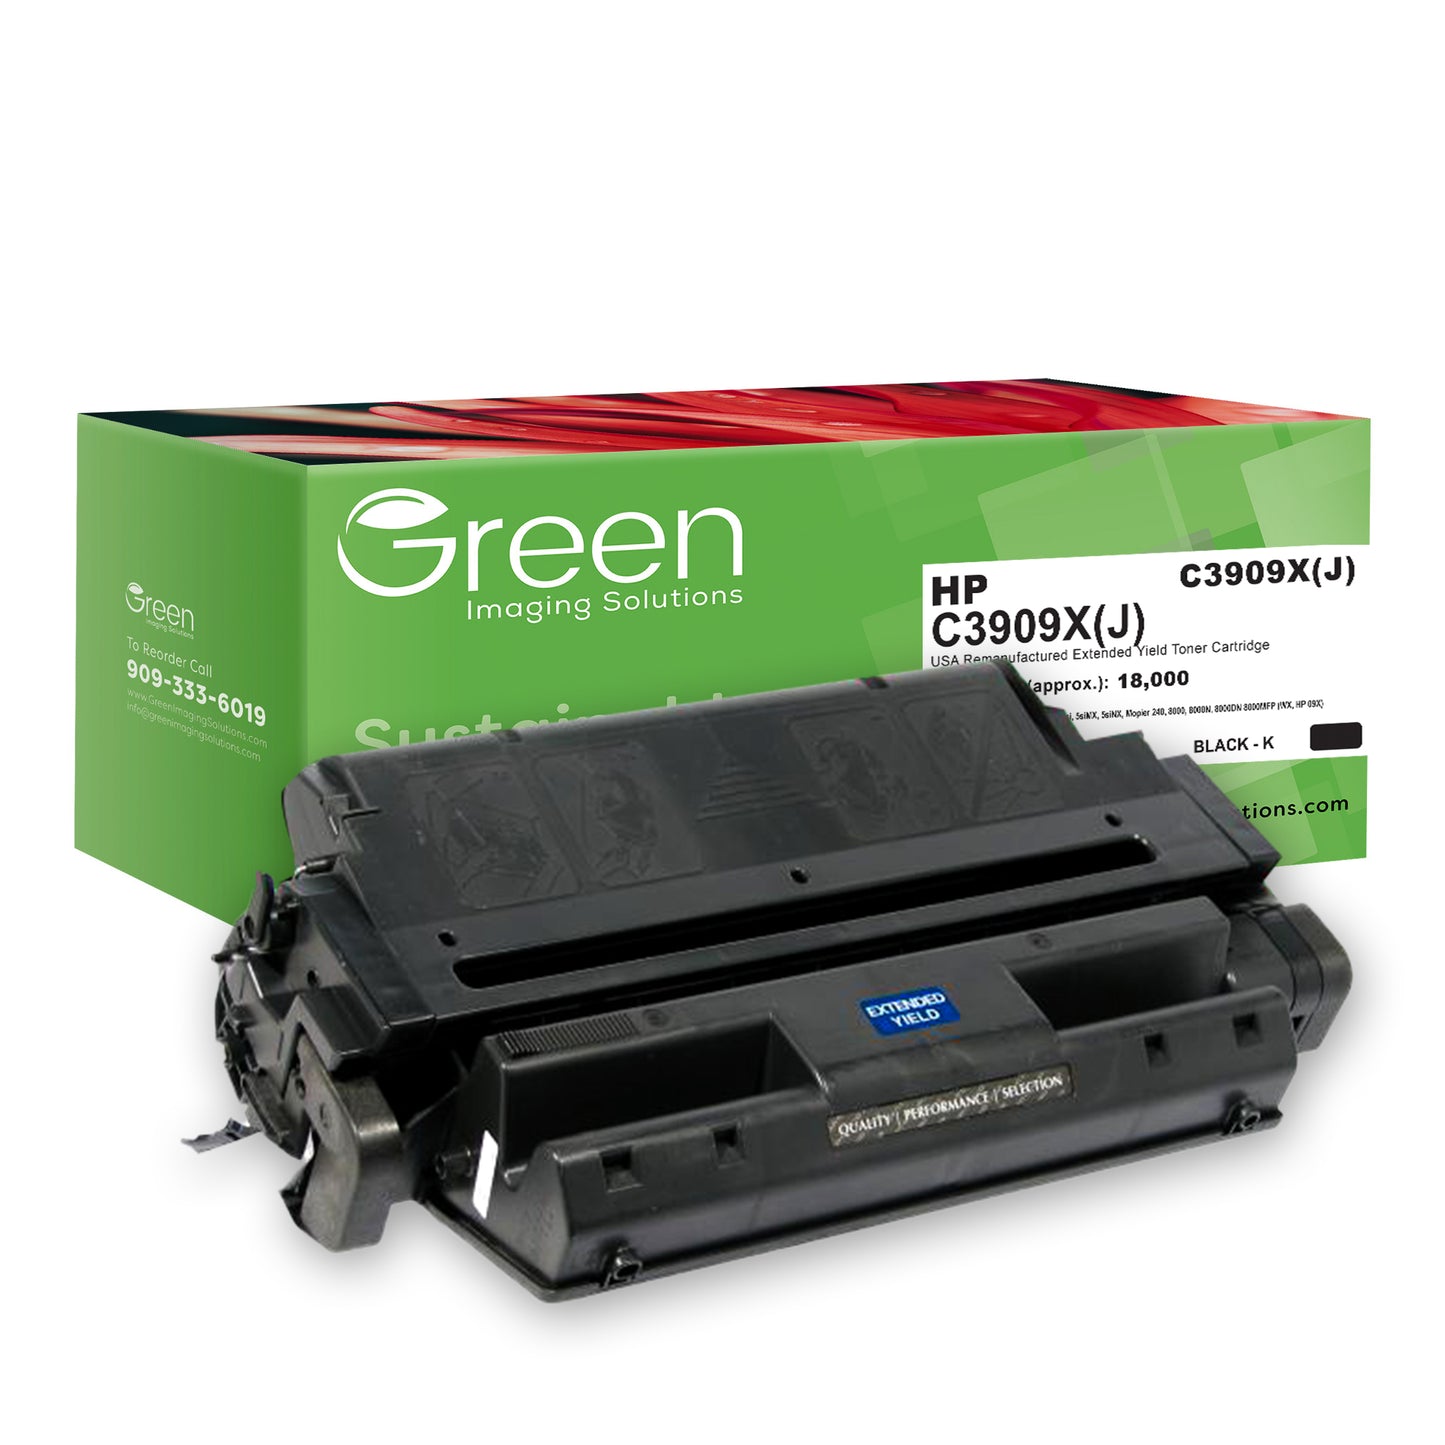 GIS USA Remanufactured Extended Yield Toner Cartridge for HP C3909X